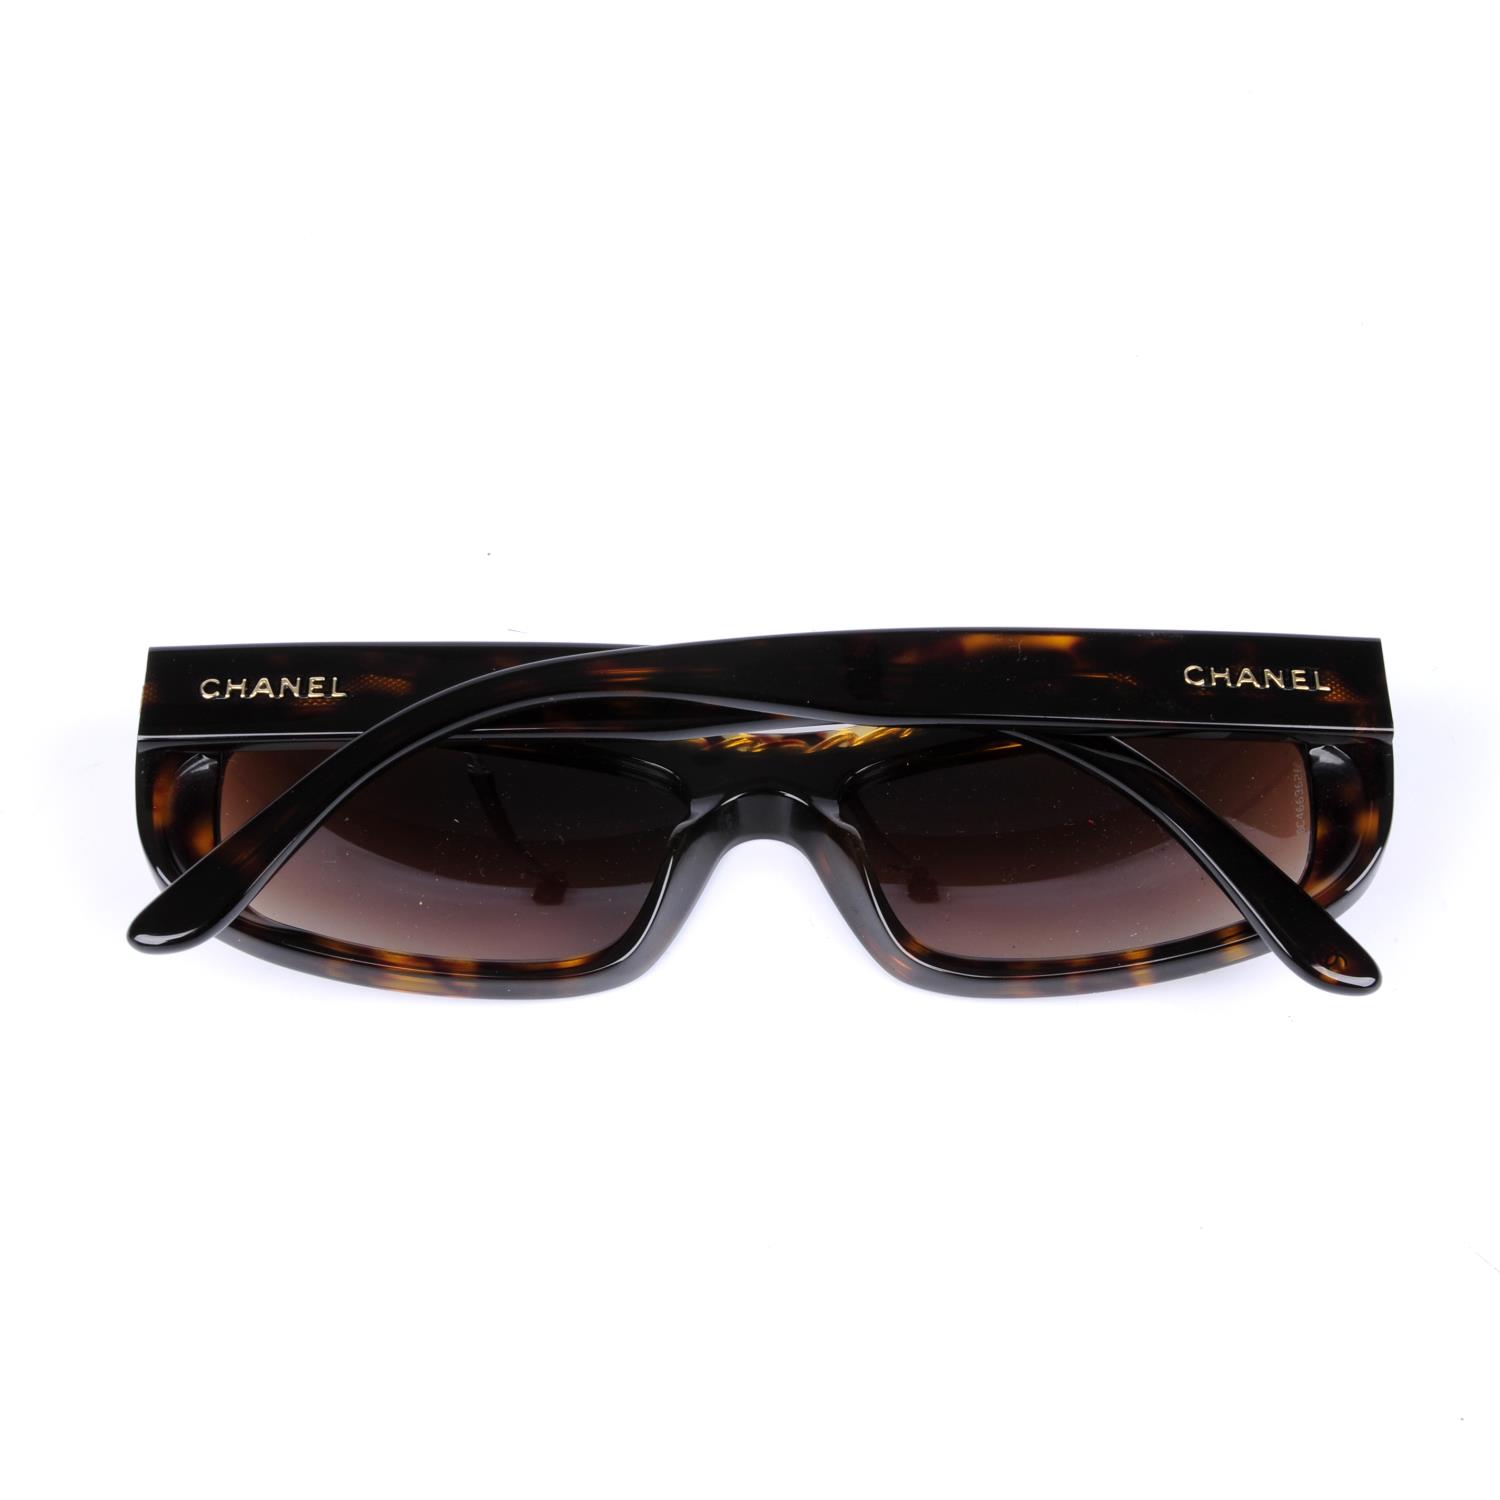 CHANEL - a pair of sunglasses. - Image 2 of 4